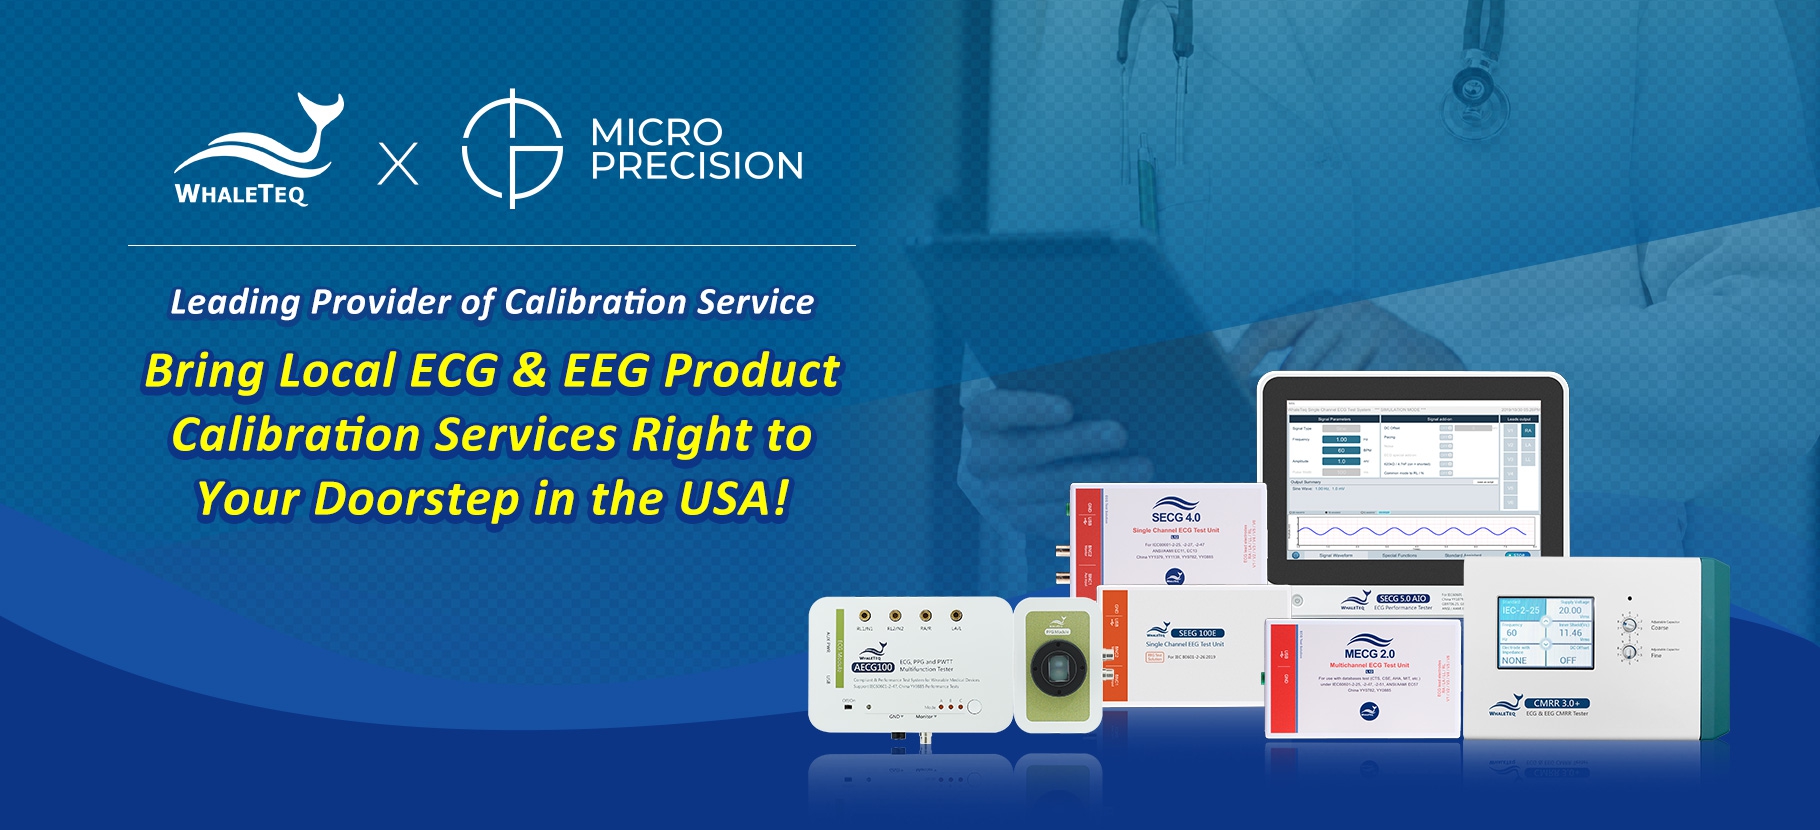 Exciting News! WhaleTeq Offers On-Site Calibration in the USA!